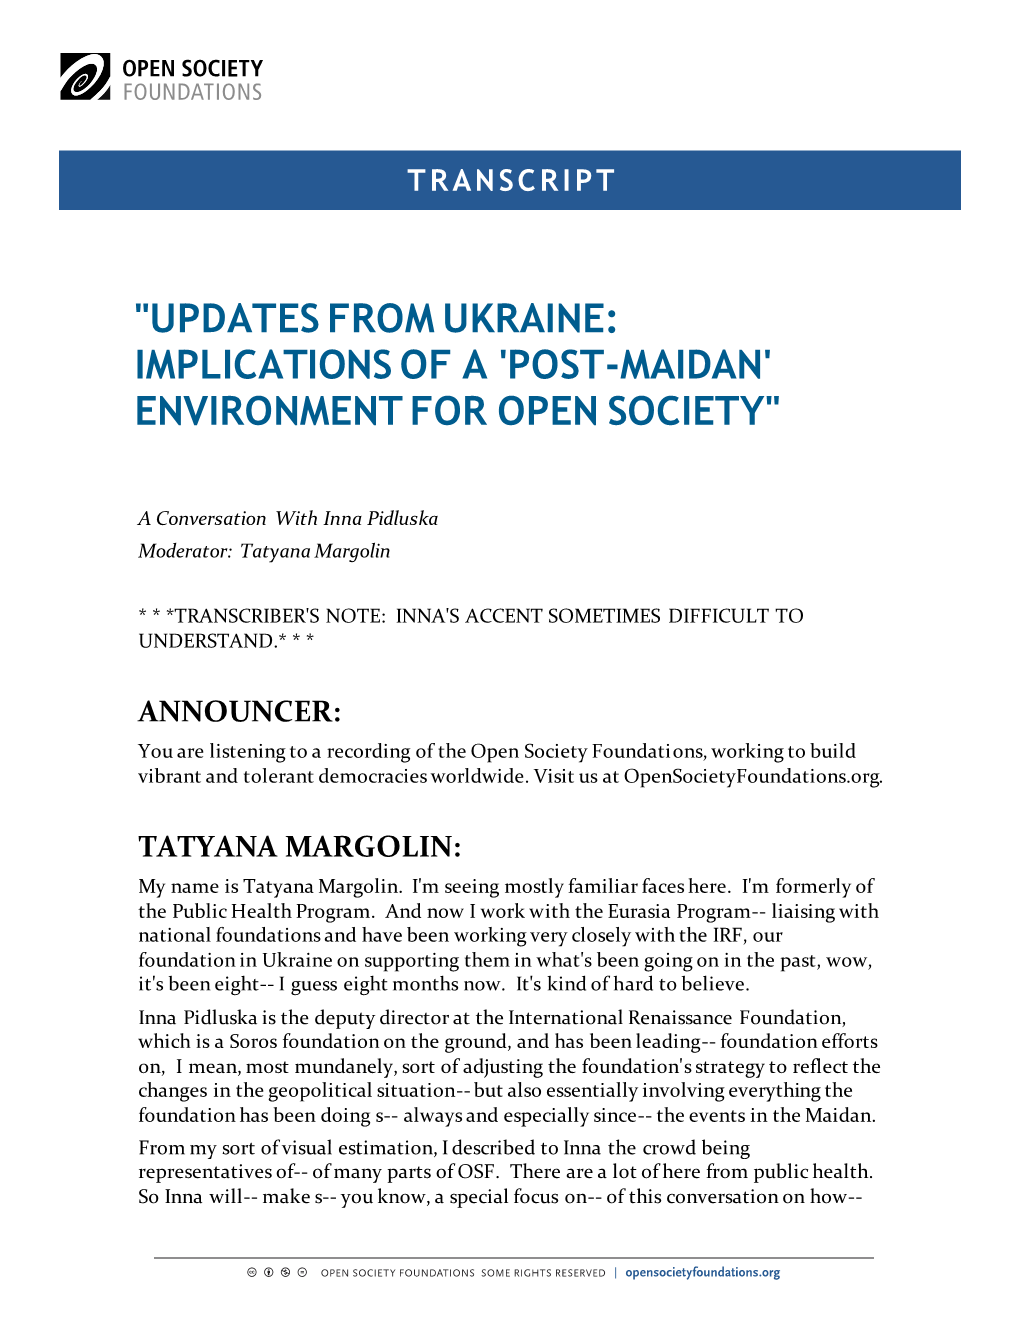 "Updates from Ukraine: Implications of a 'Post-Maidan' Environment for Open Society"